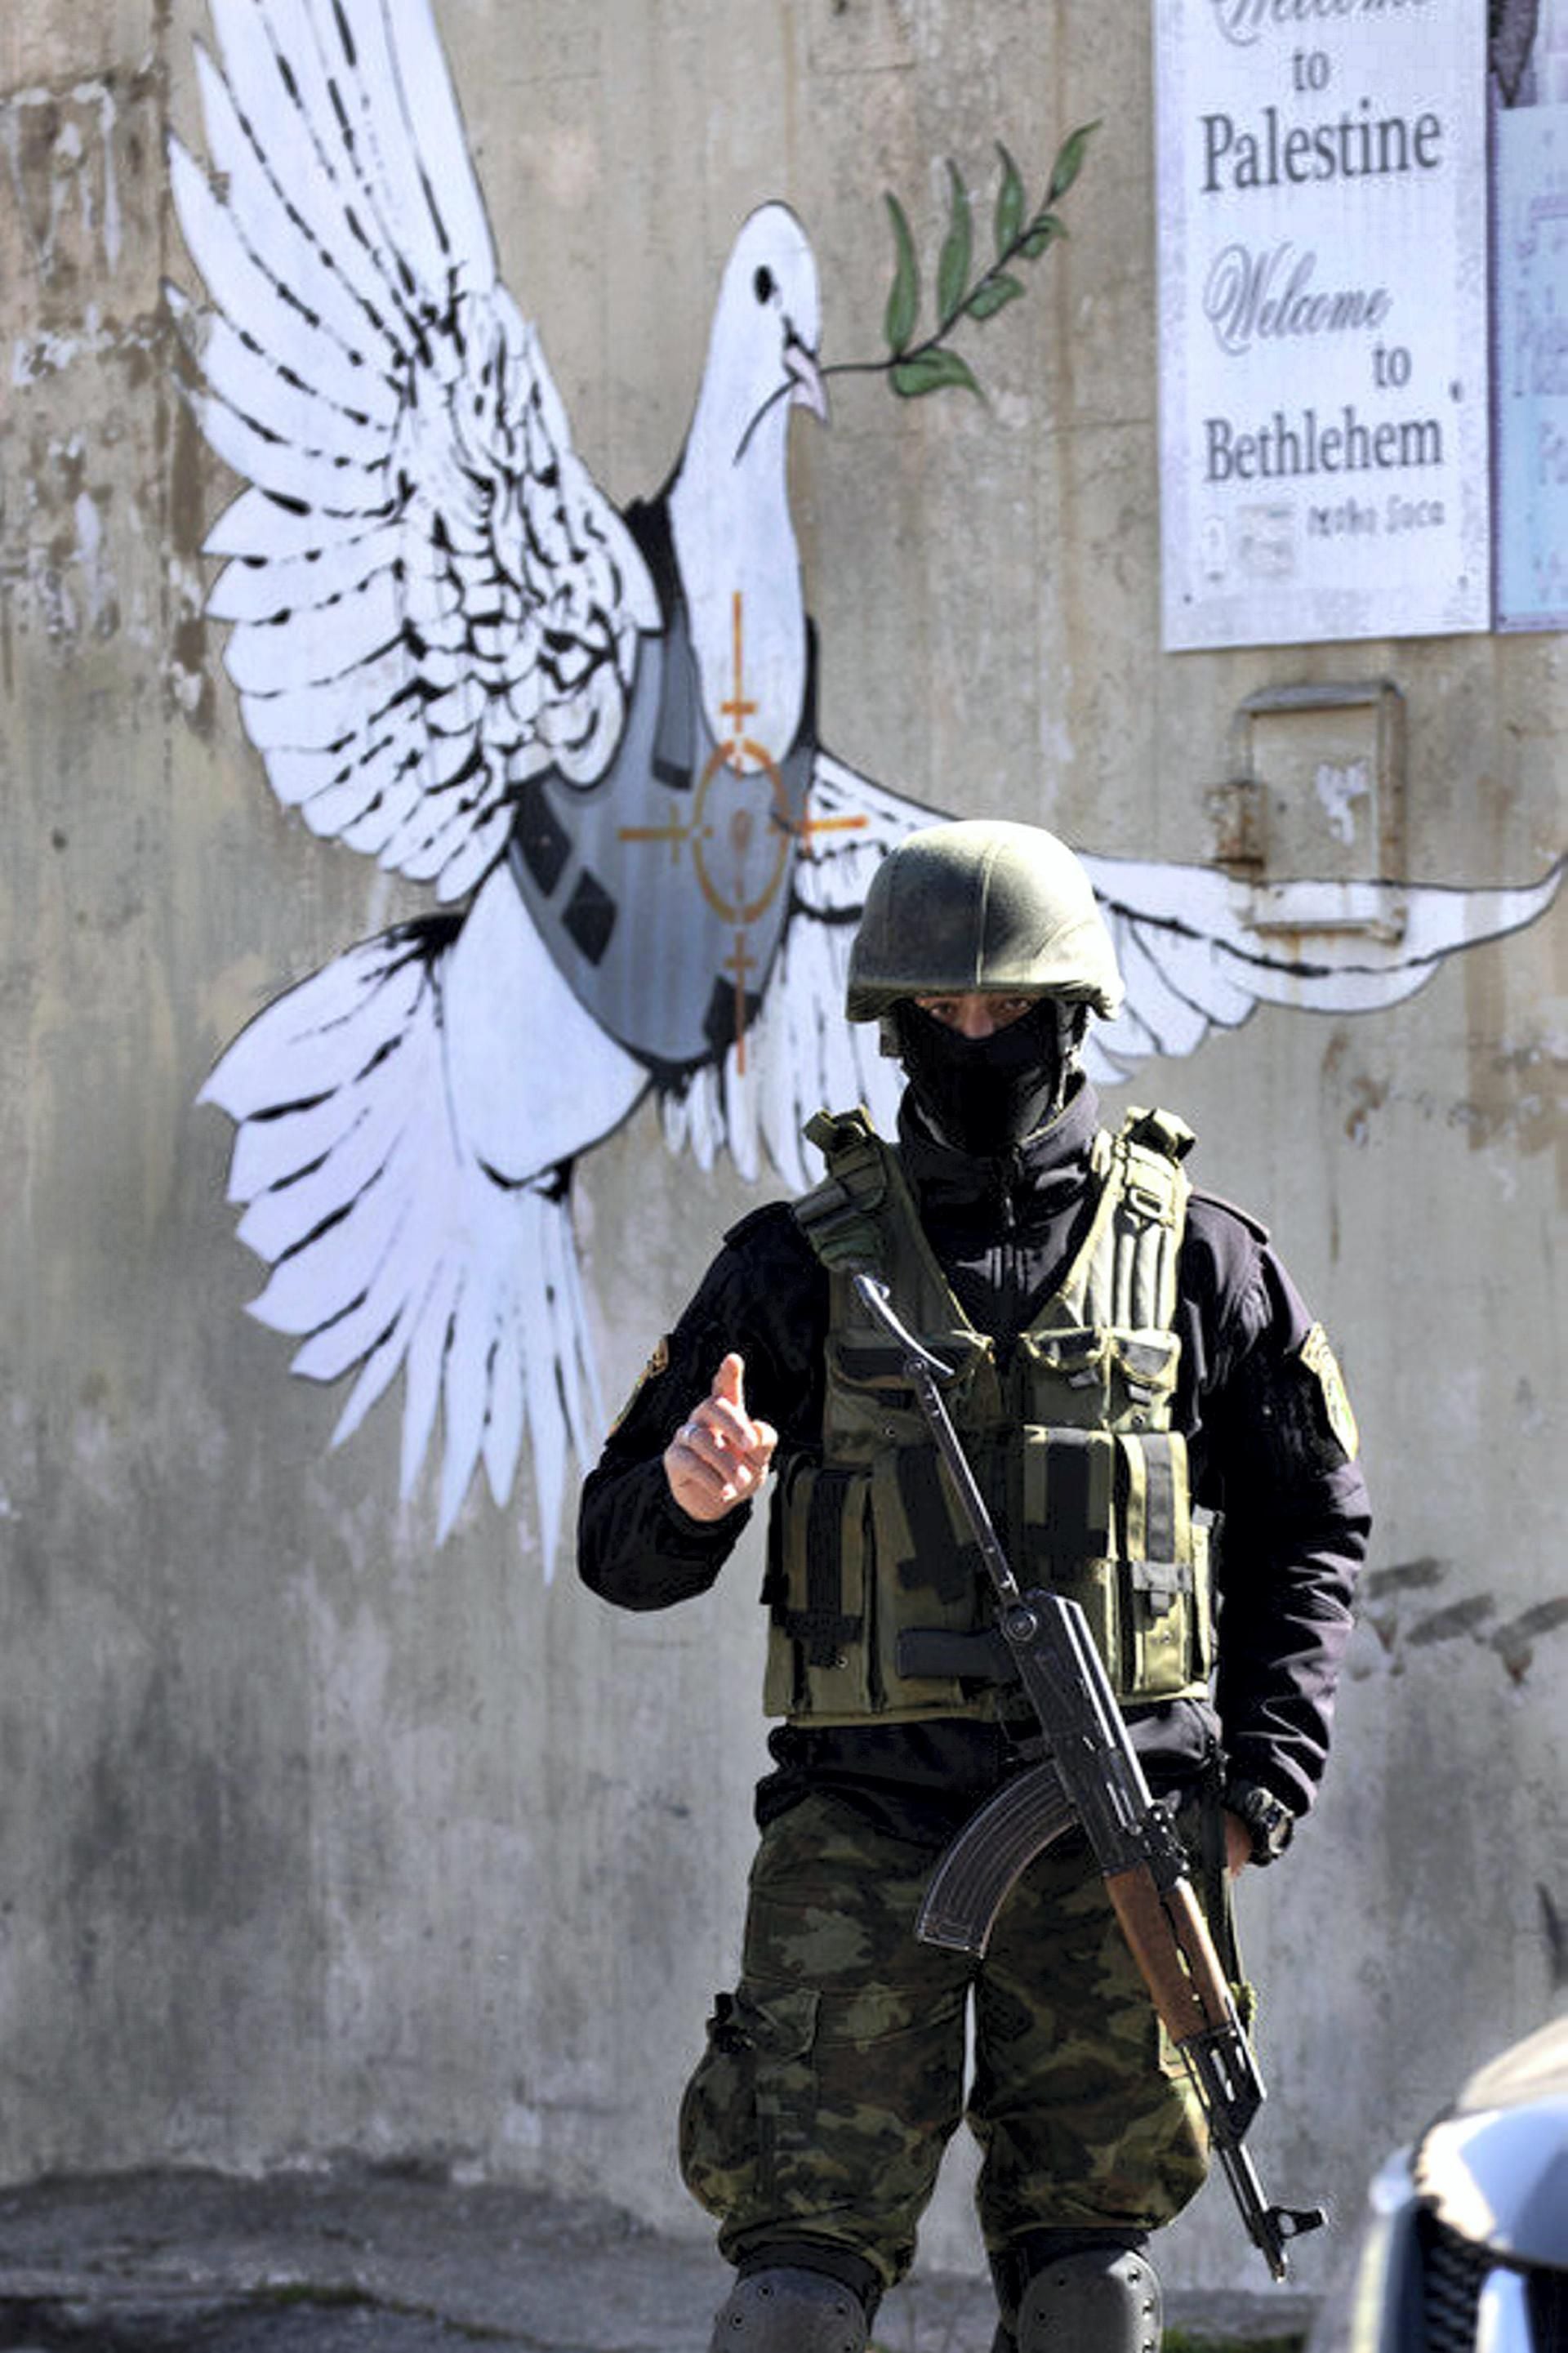 Banksy's West Bank dove - and the Palestinian shopowner who met